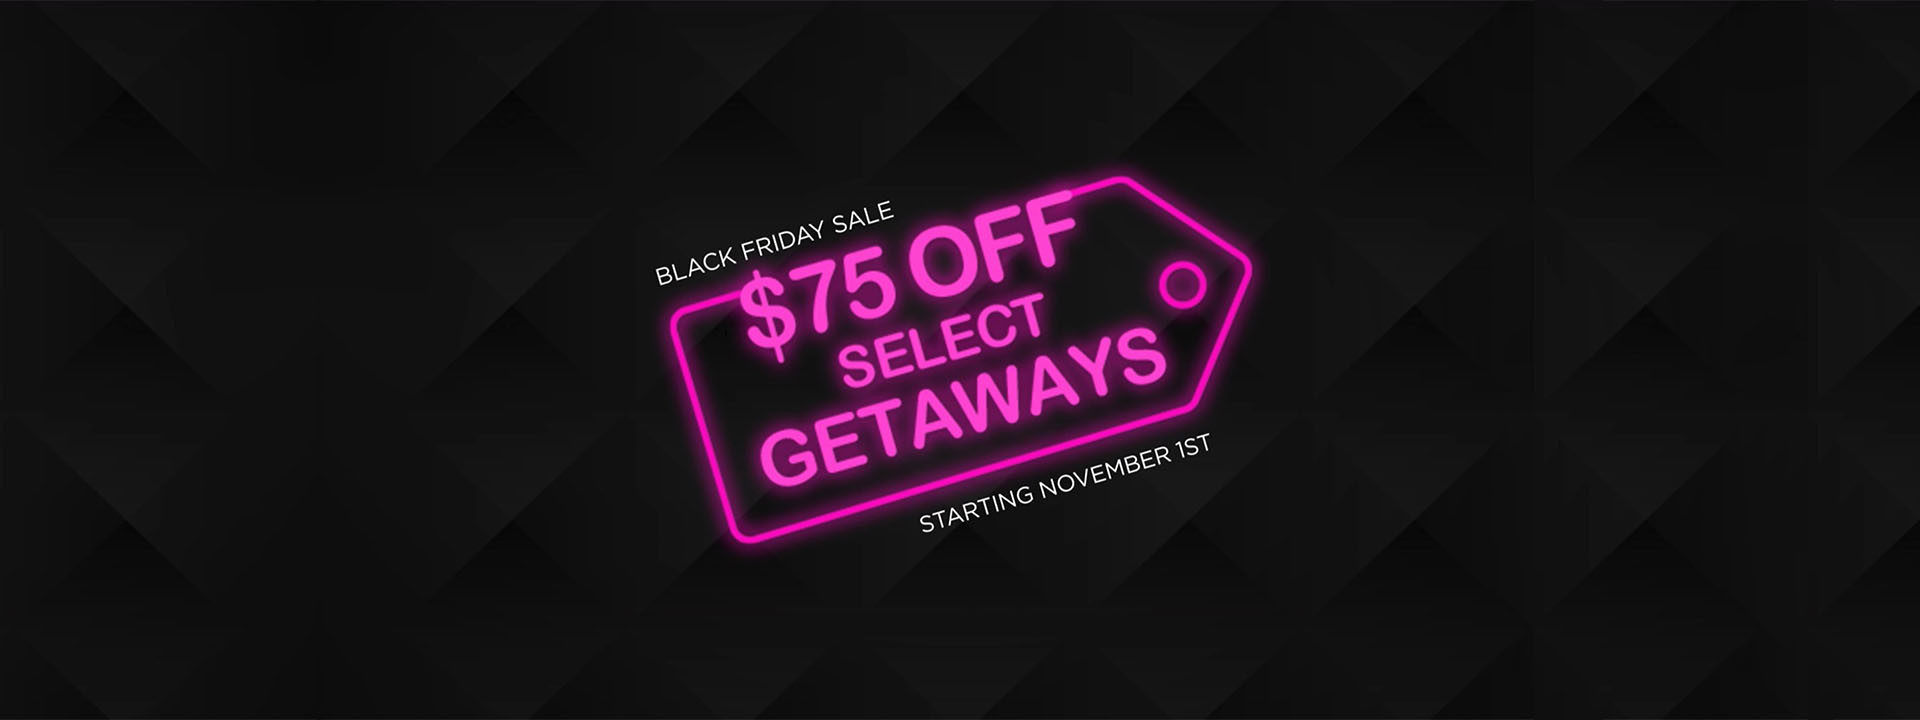 $75 off black friday vacation package deals - westgate sports & entertainment